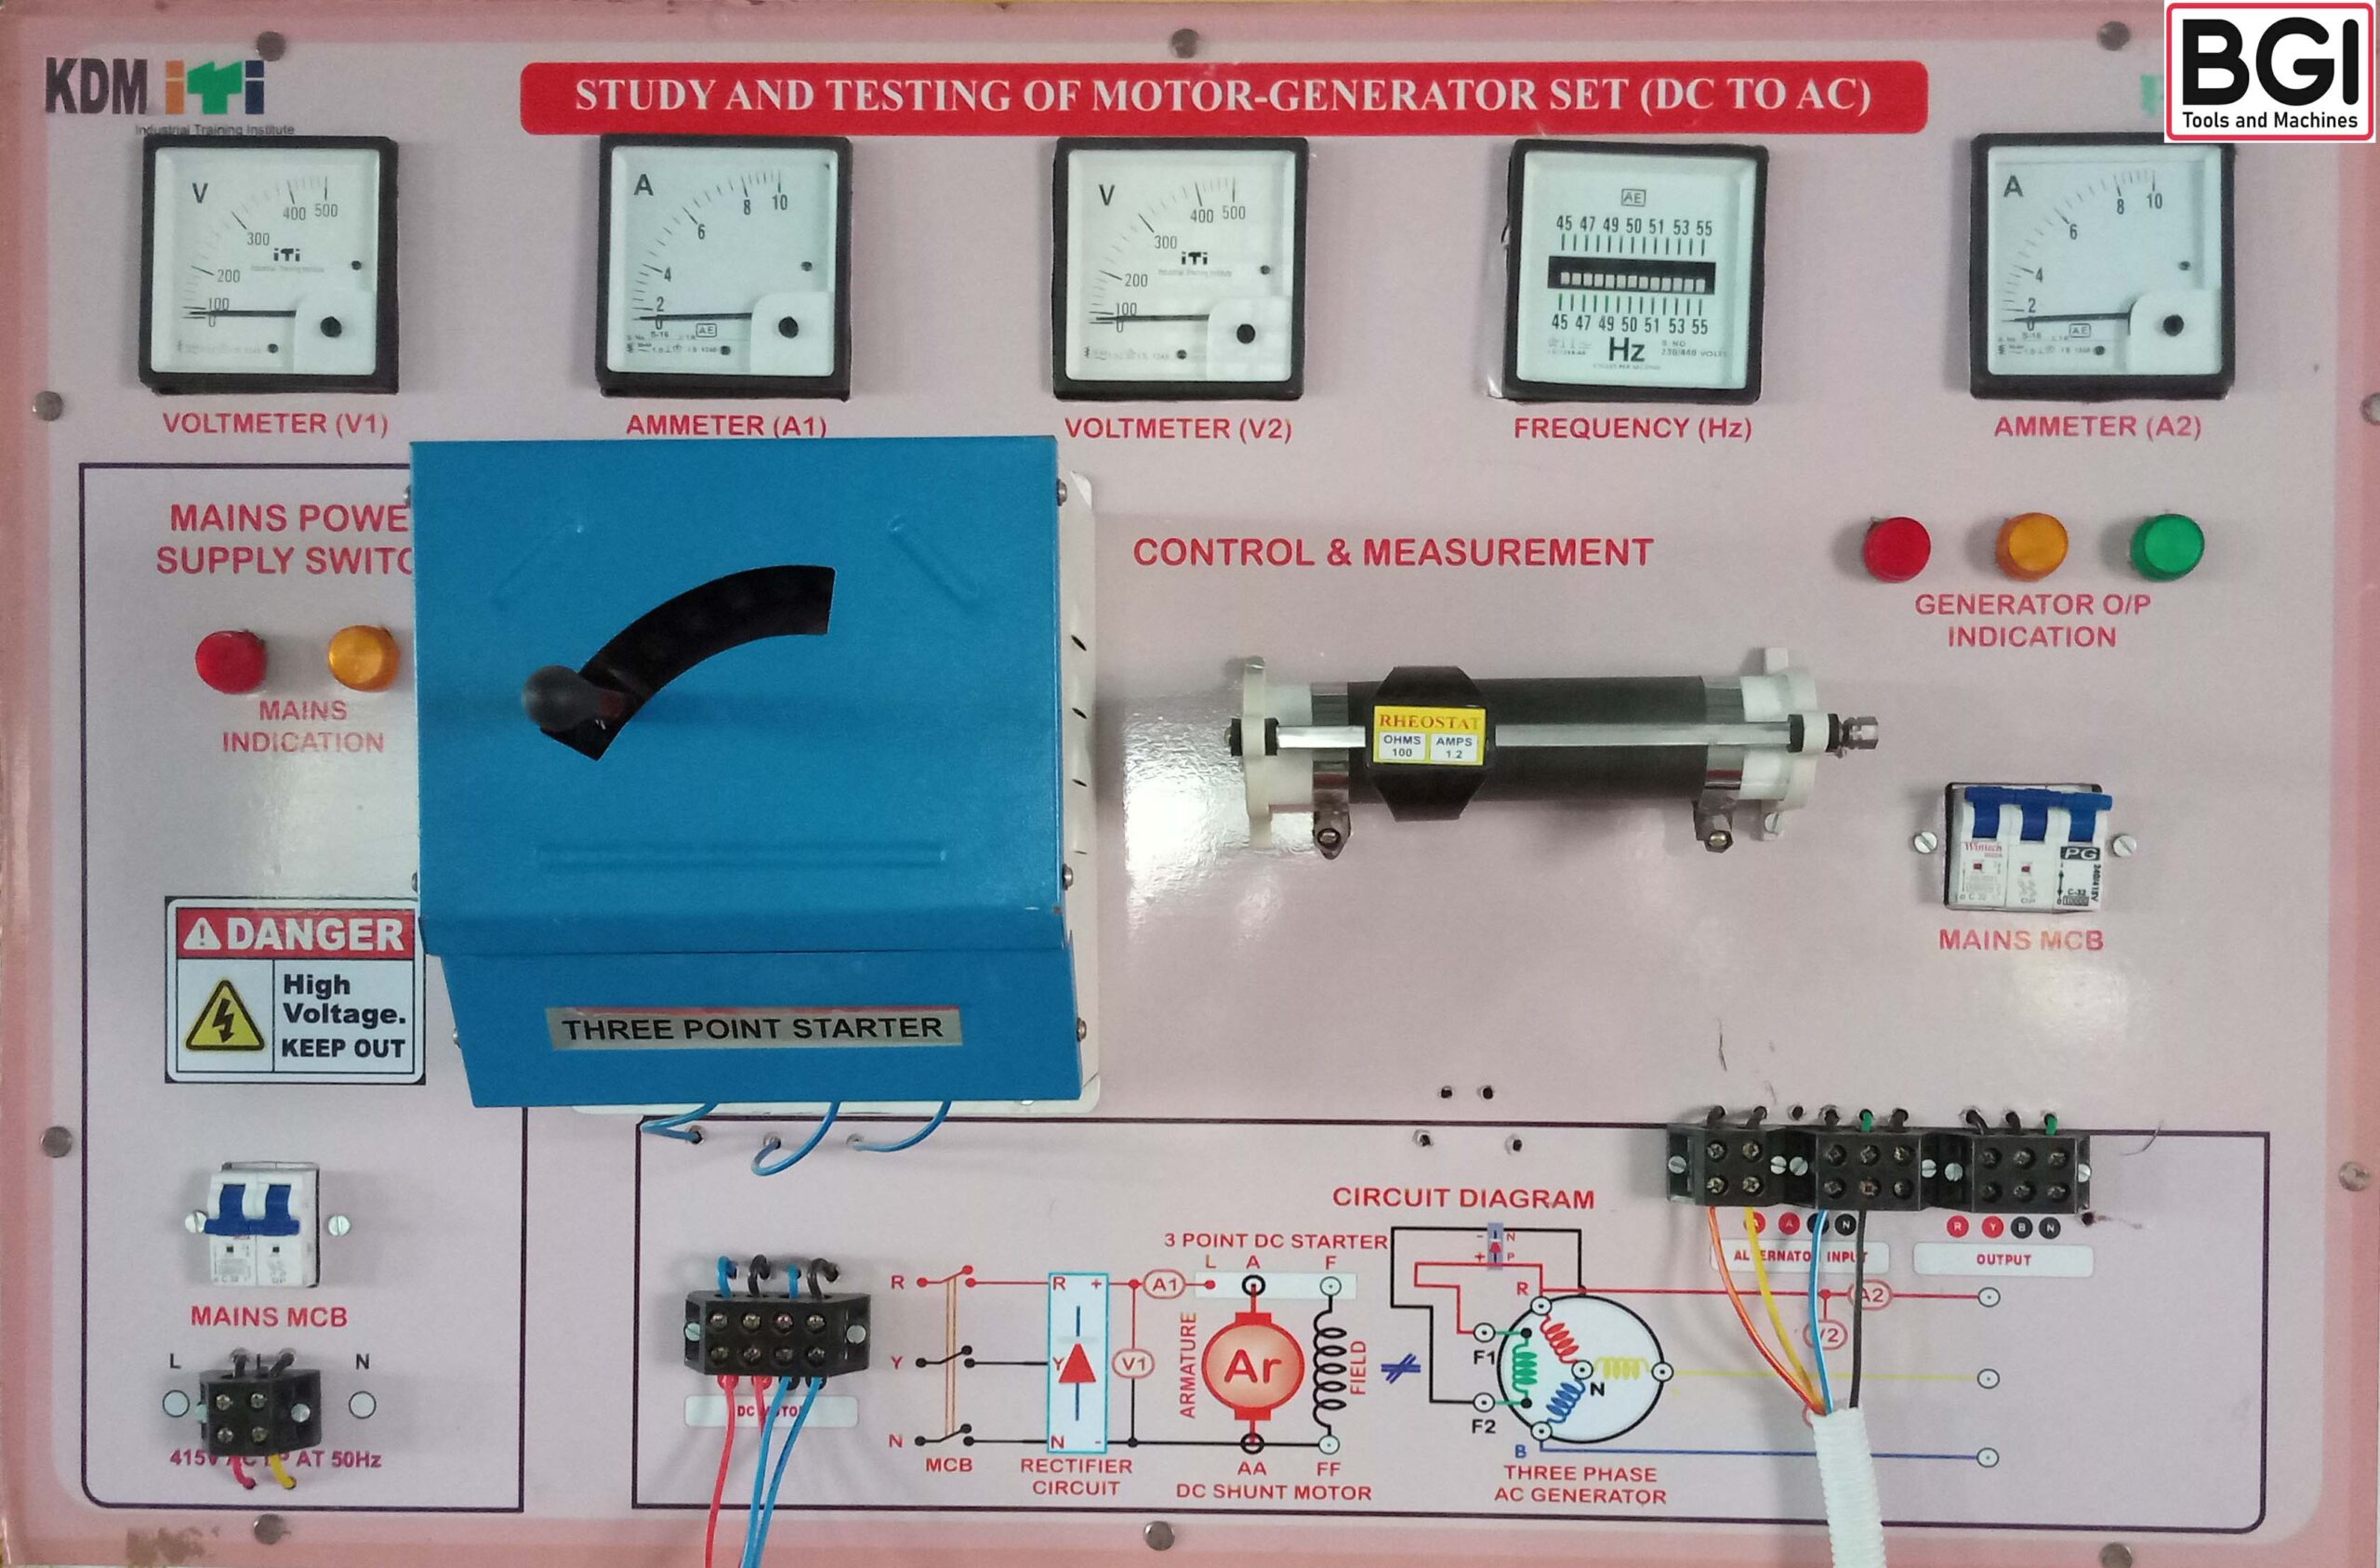 Motor Generator DC to AC is 1 the By BGI -